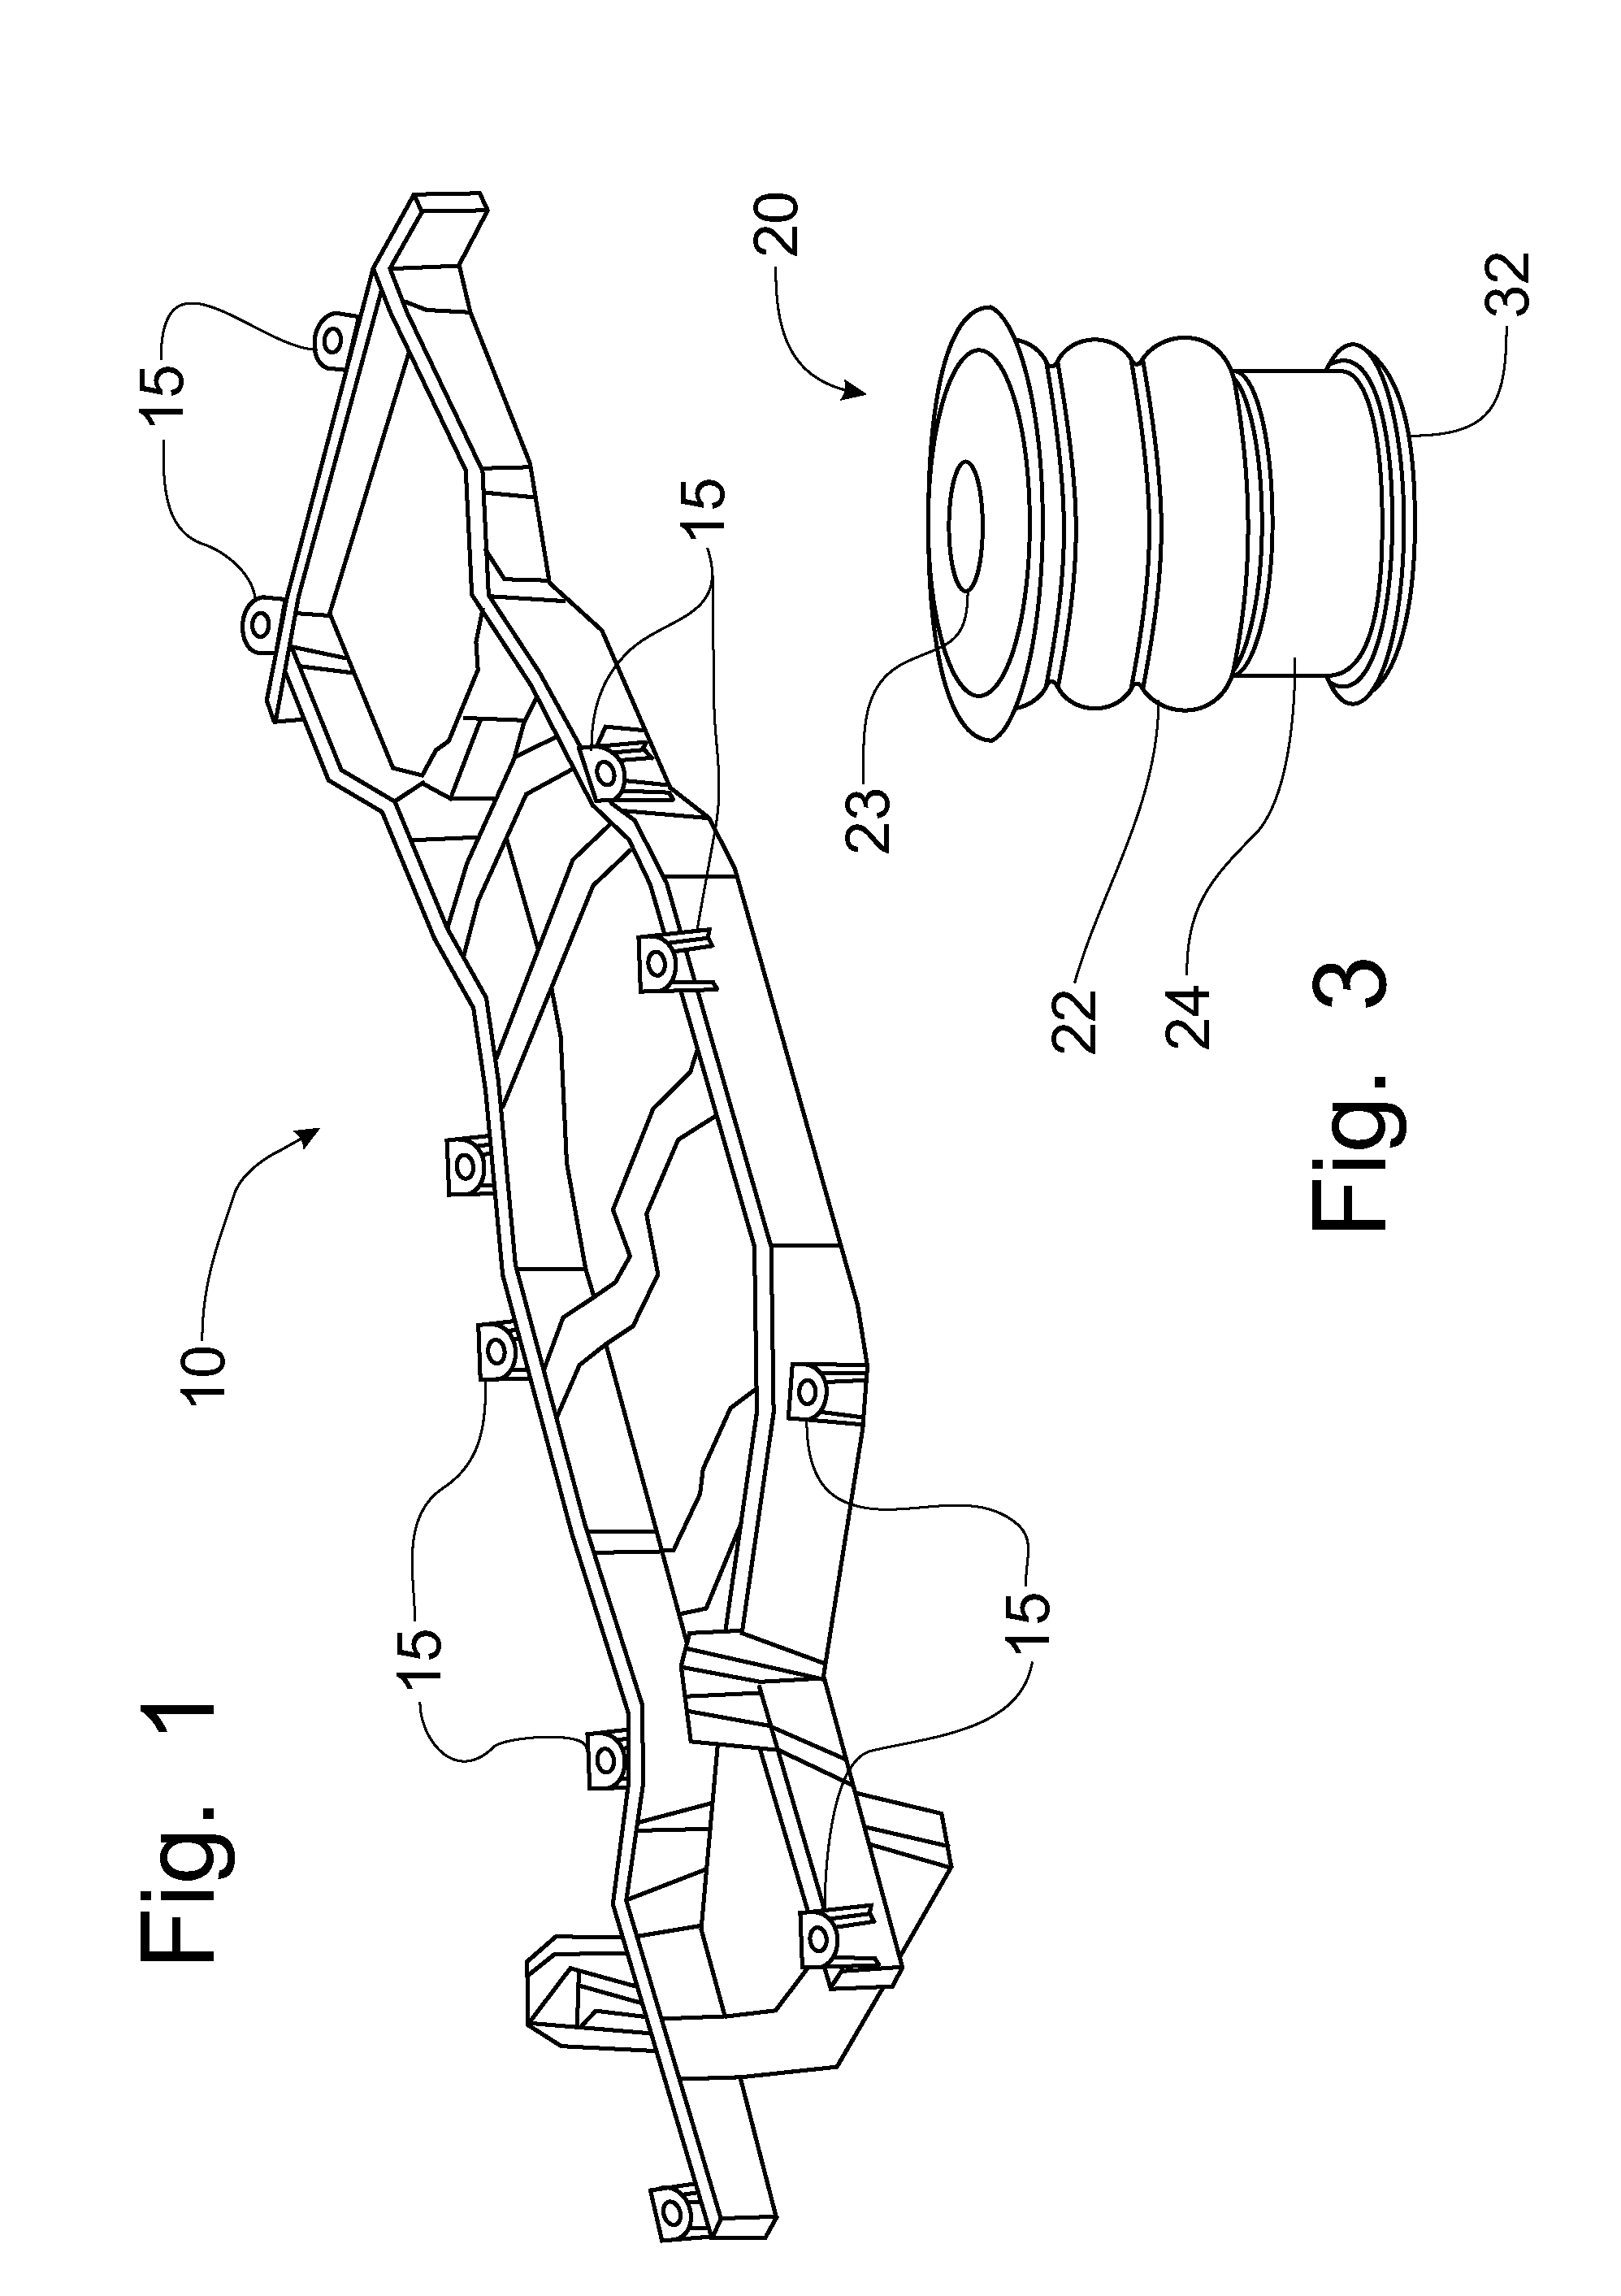 Hybrid material body mount for automotive vehicles